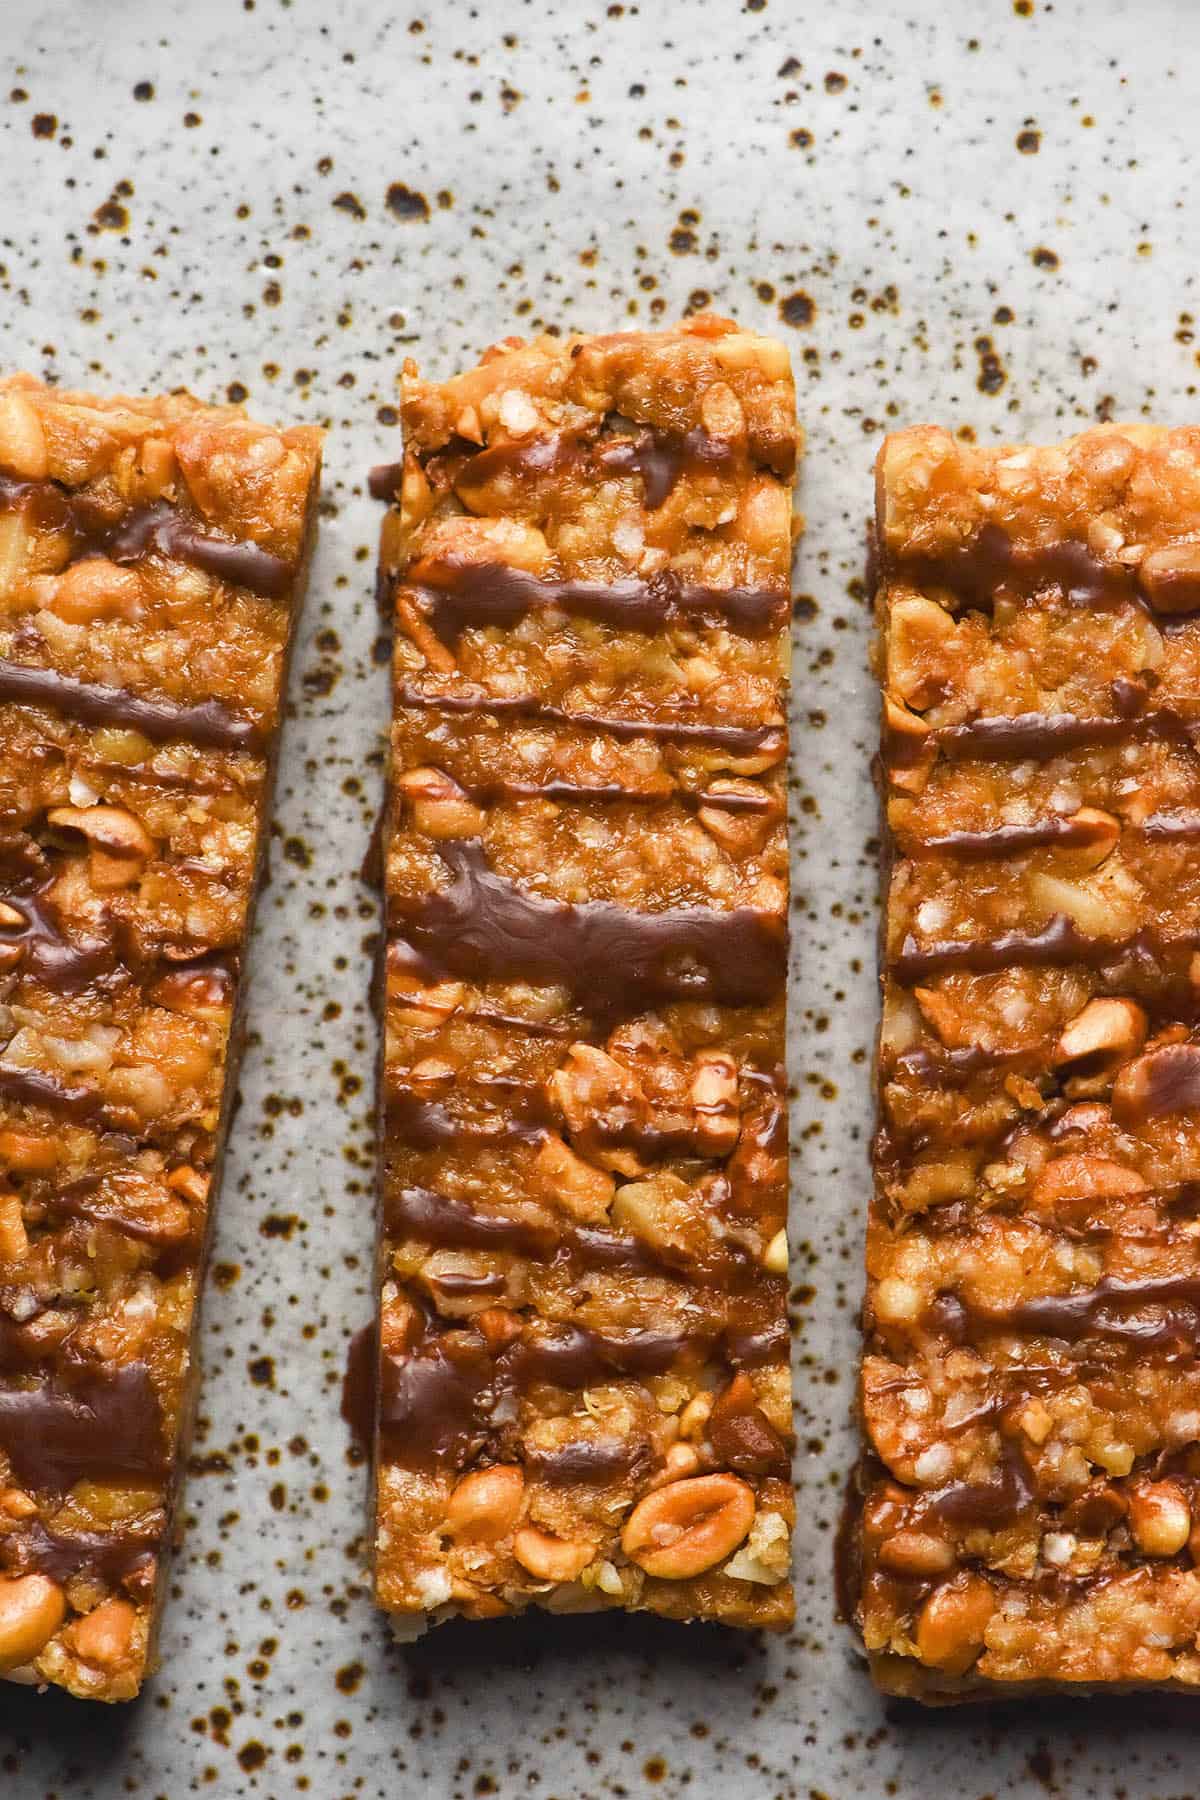 An aerial sunlit image of Low FODMAP granola bars drizzled with chocolate and sitting on a white speckled ceramic plate.